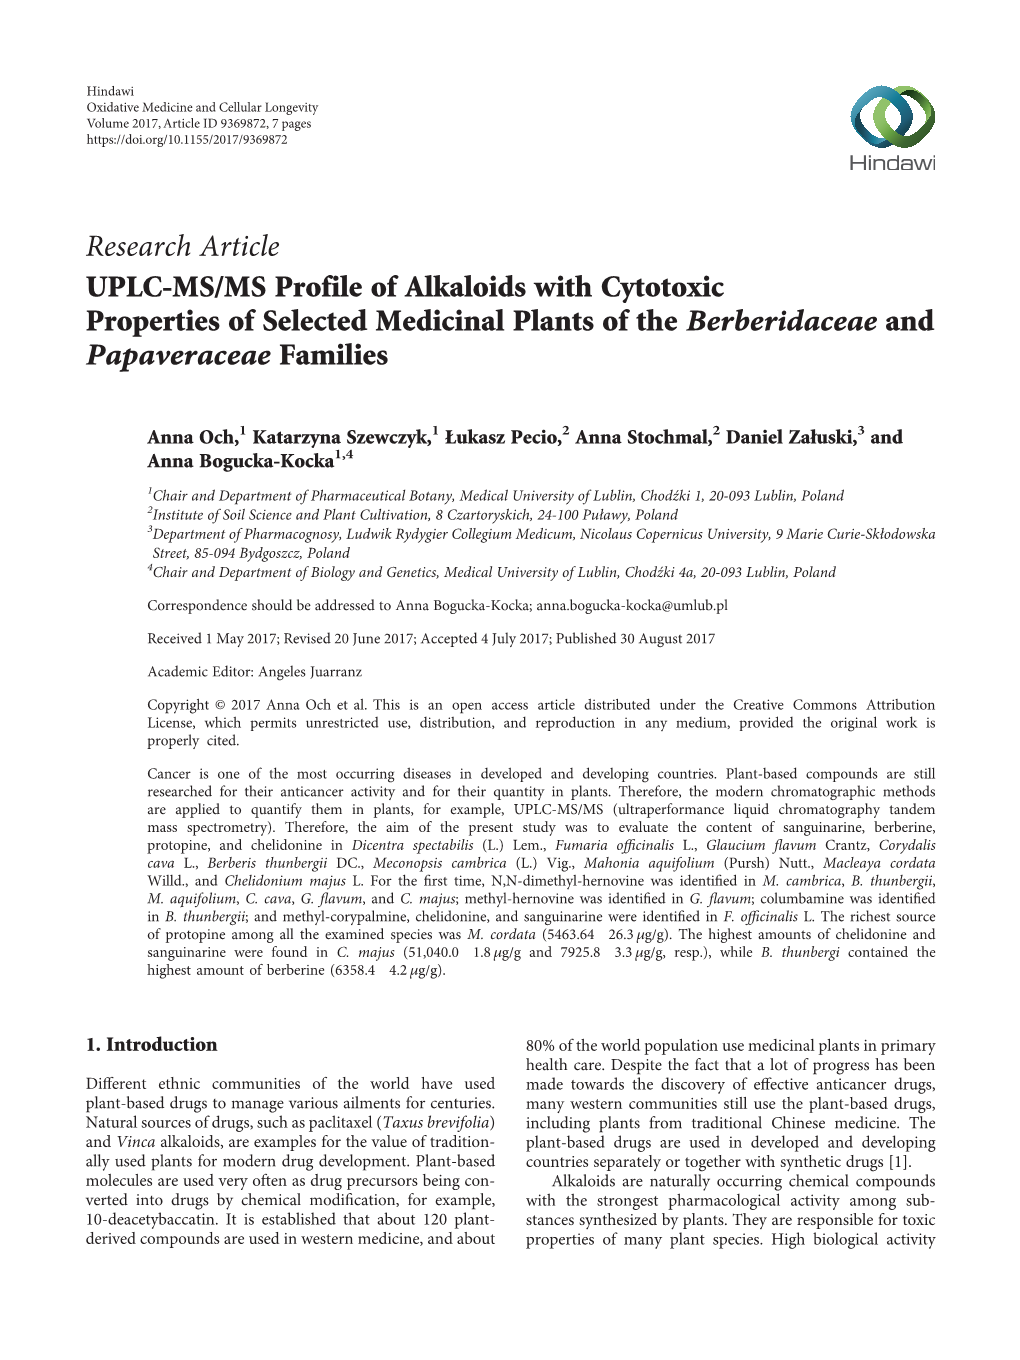 UPLC-MS/MS Profile of Alkaloids with Cytotoxic Properties of Selected Medicinal Plants of the Berberidaceae and Papaveraceae Families